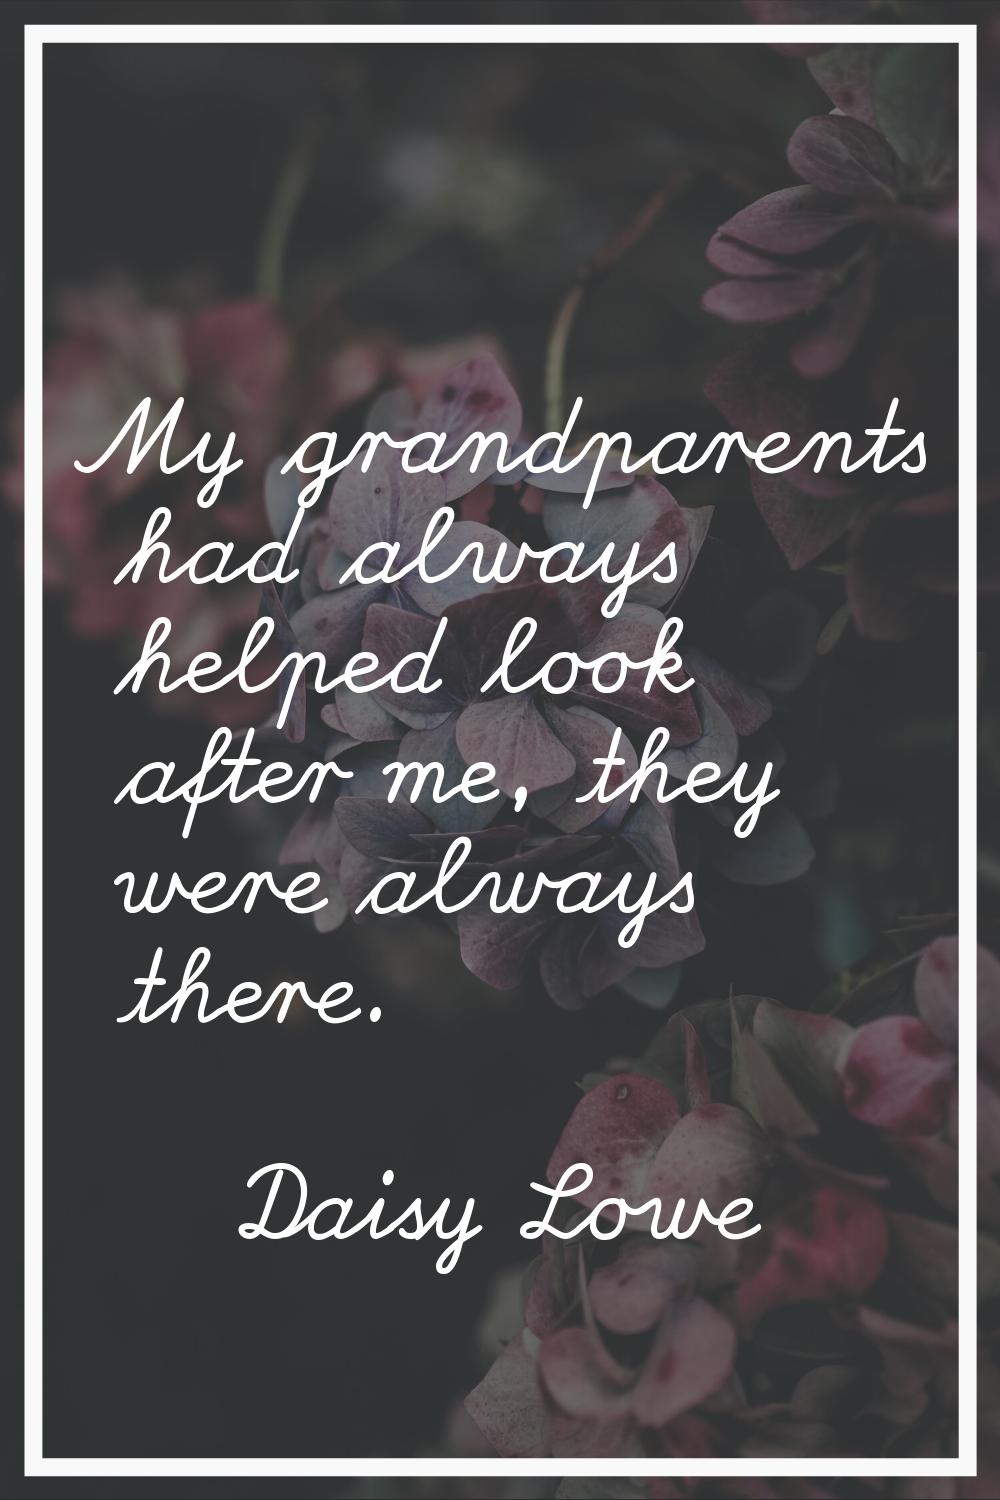 My grandparents had always helped look after me, they were always there.